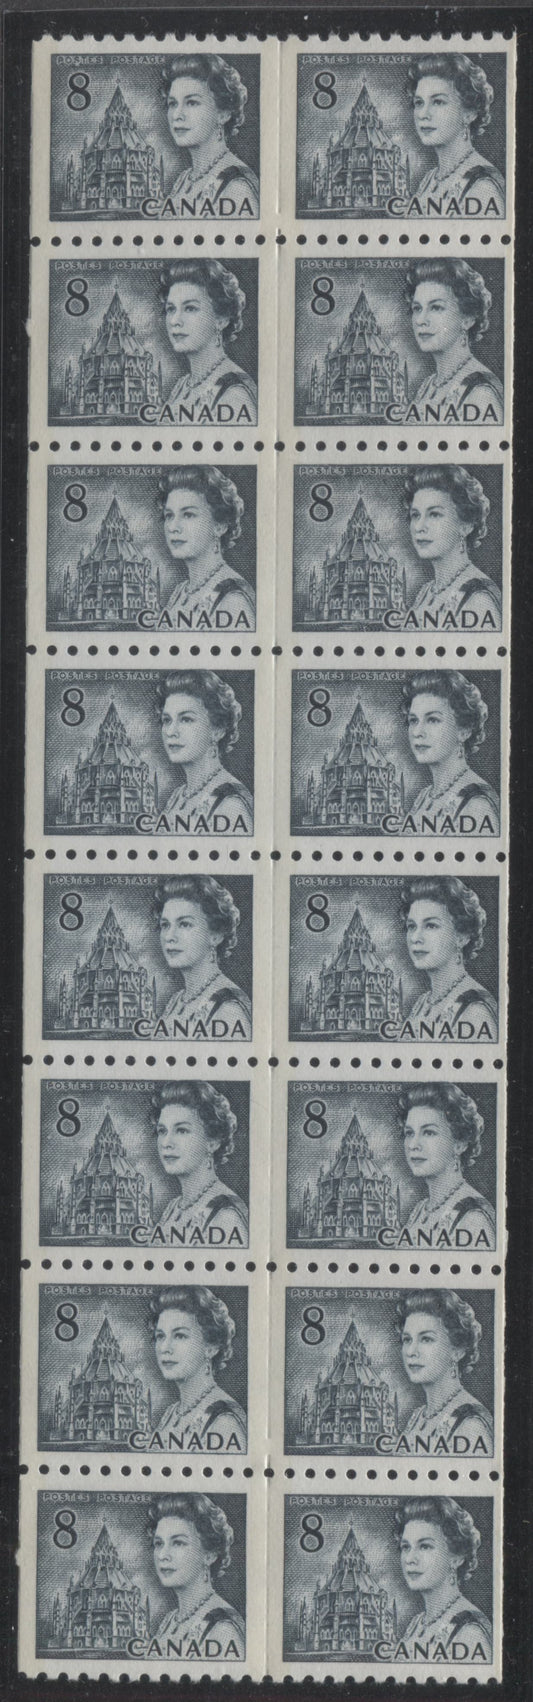 Lot 66 Canada #550p 8c Slate Queen Elizabeth II, 1967-1973 Centennials, A VFNH GT2 Tagged Unsevered Coil Block Of 16 On White F5 Paper With PVA Gum, Black On Light Vioelt Under UV